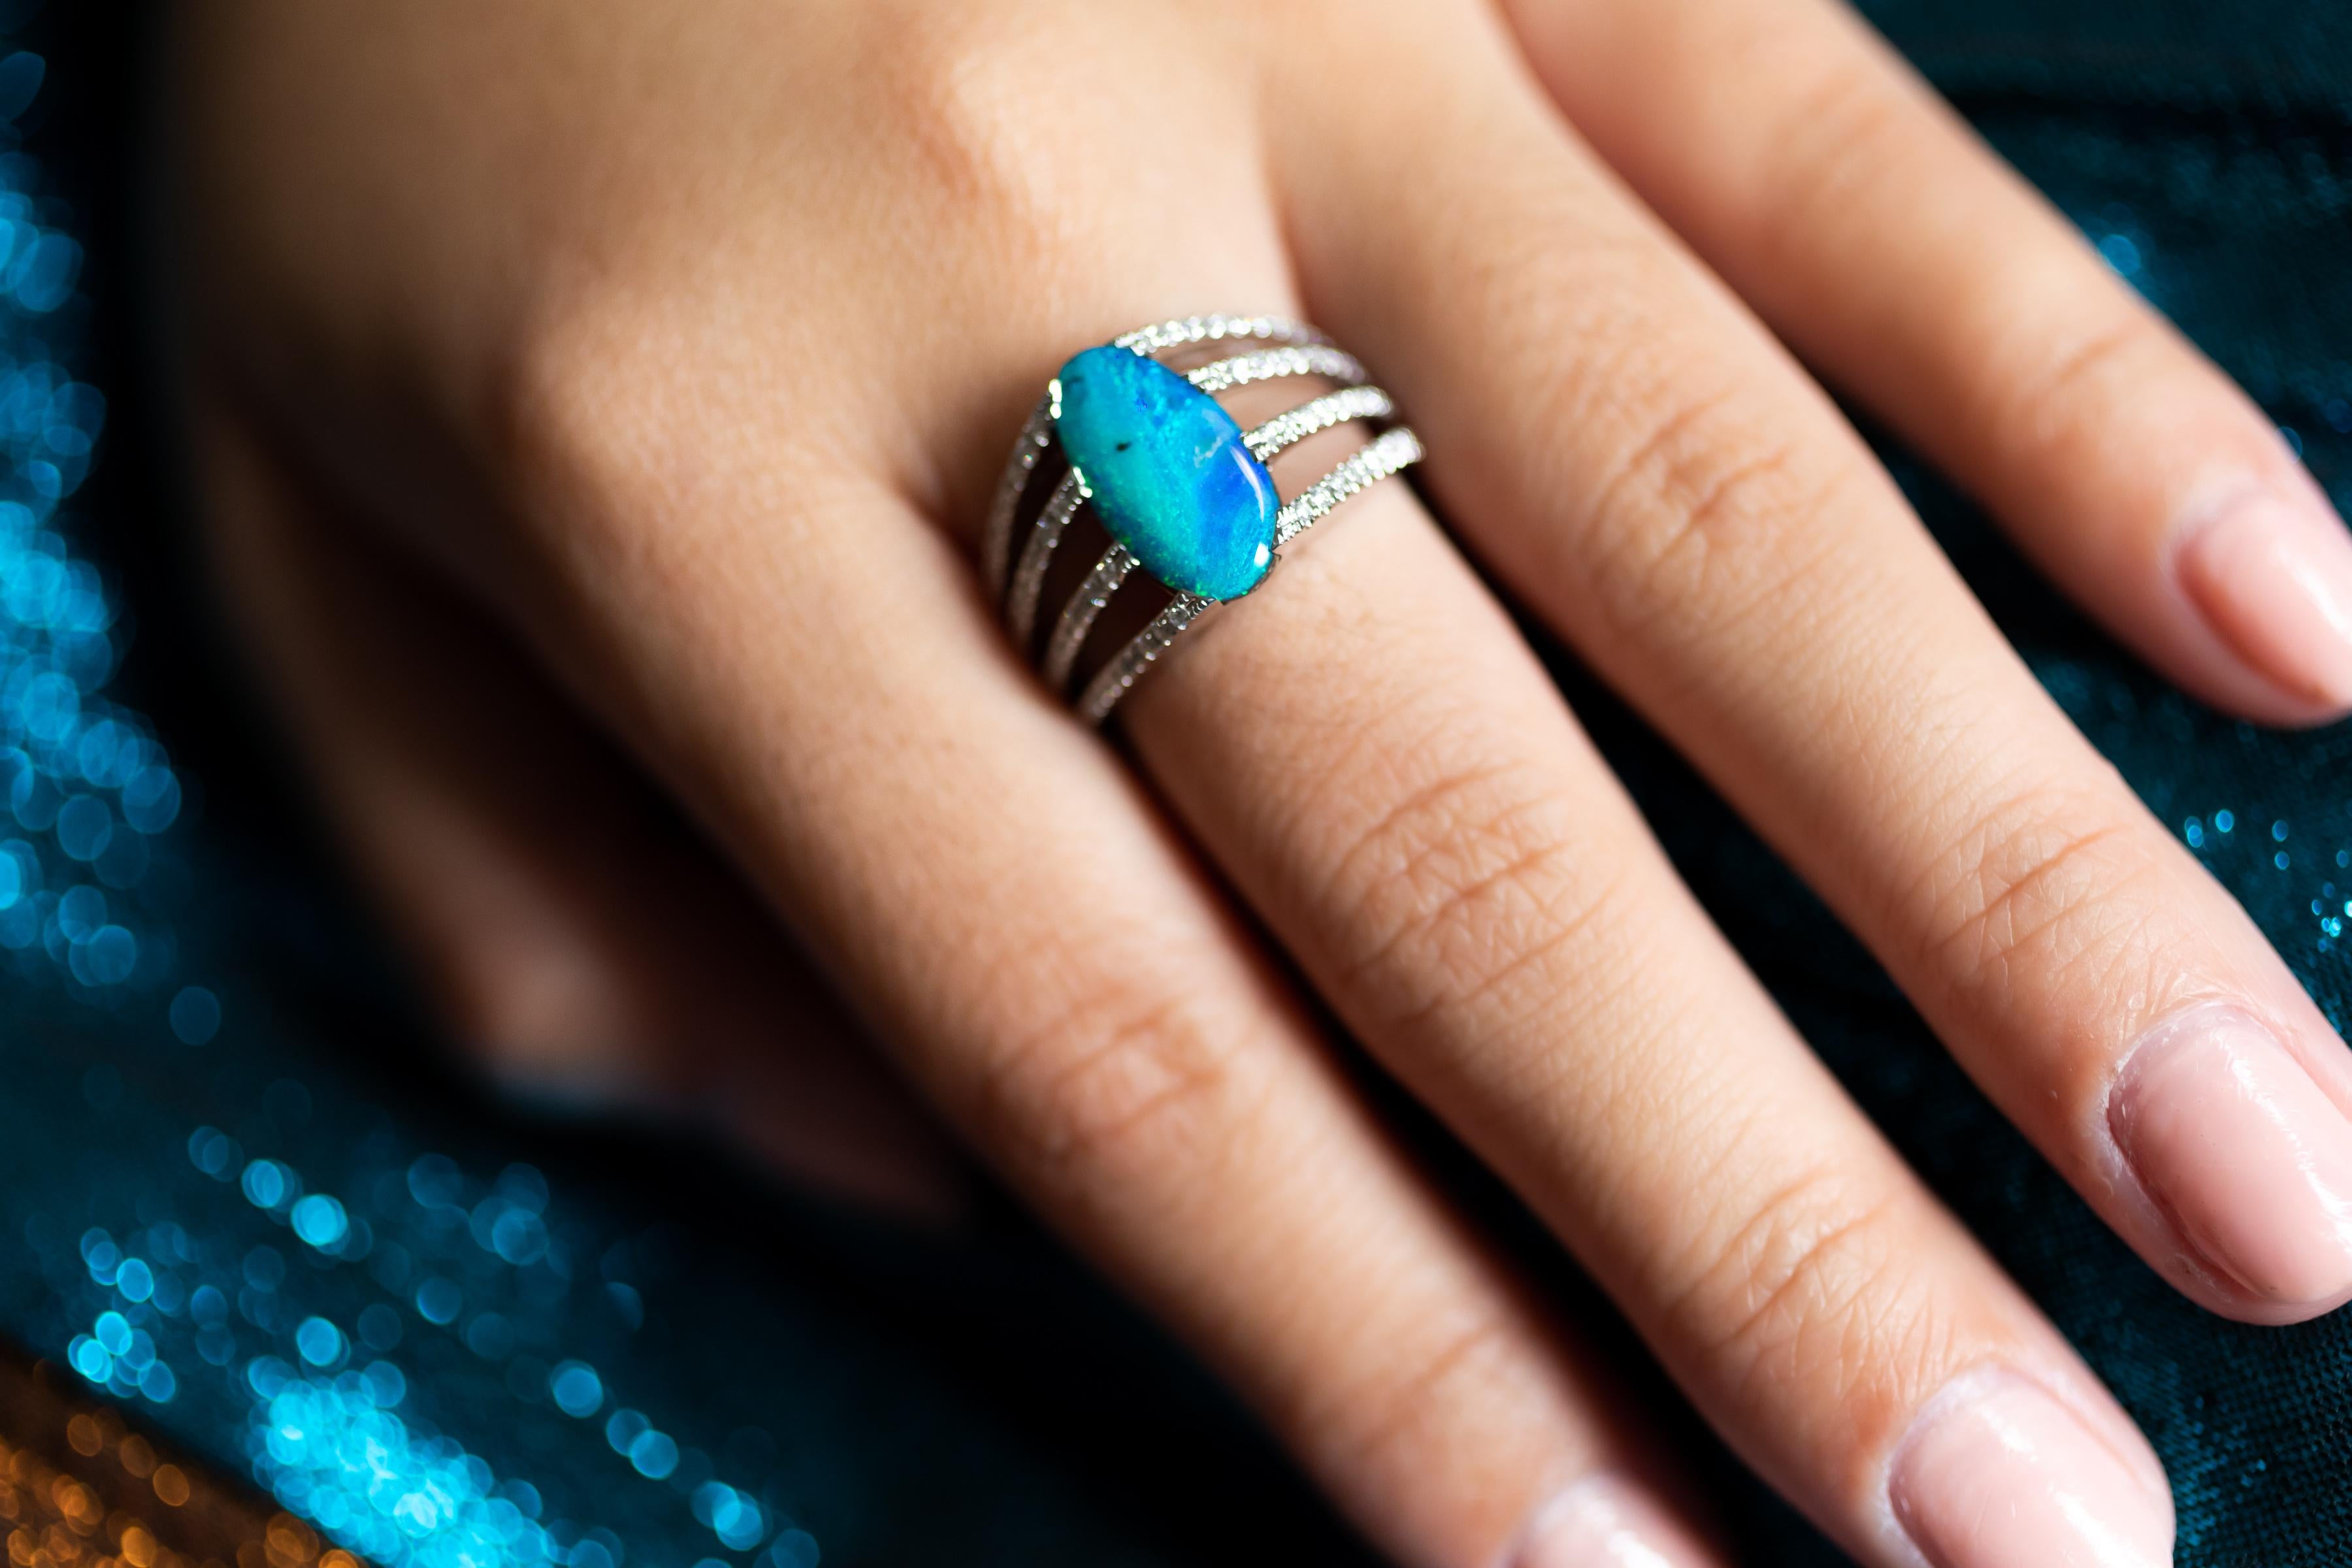 “Princess de Neve” opal ring was inspired by tales of princesses, ice palaces and enchanted kisses. A magical boulder opal (2.77ct) from our own mines in Jundah-Opalville is set in a graceful 18K white gold setting with 92 lustrous diamonds.